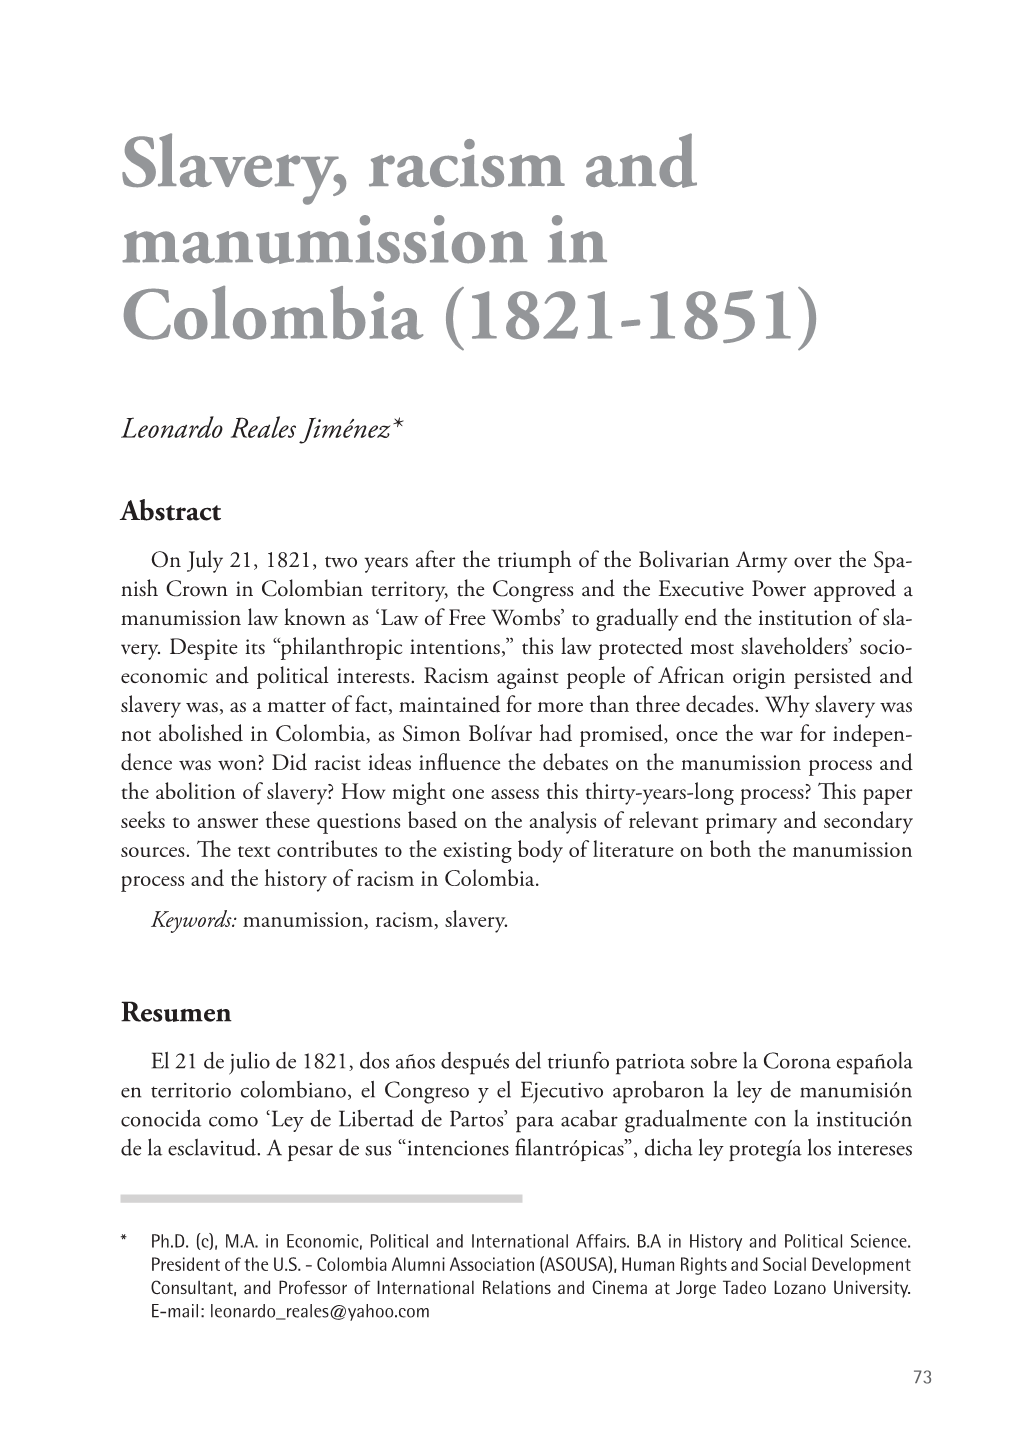 Slavery, Racism and Manumission in Colombia (1821-1851)